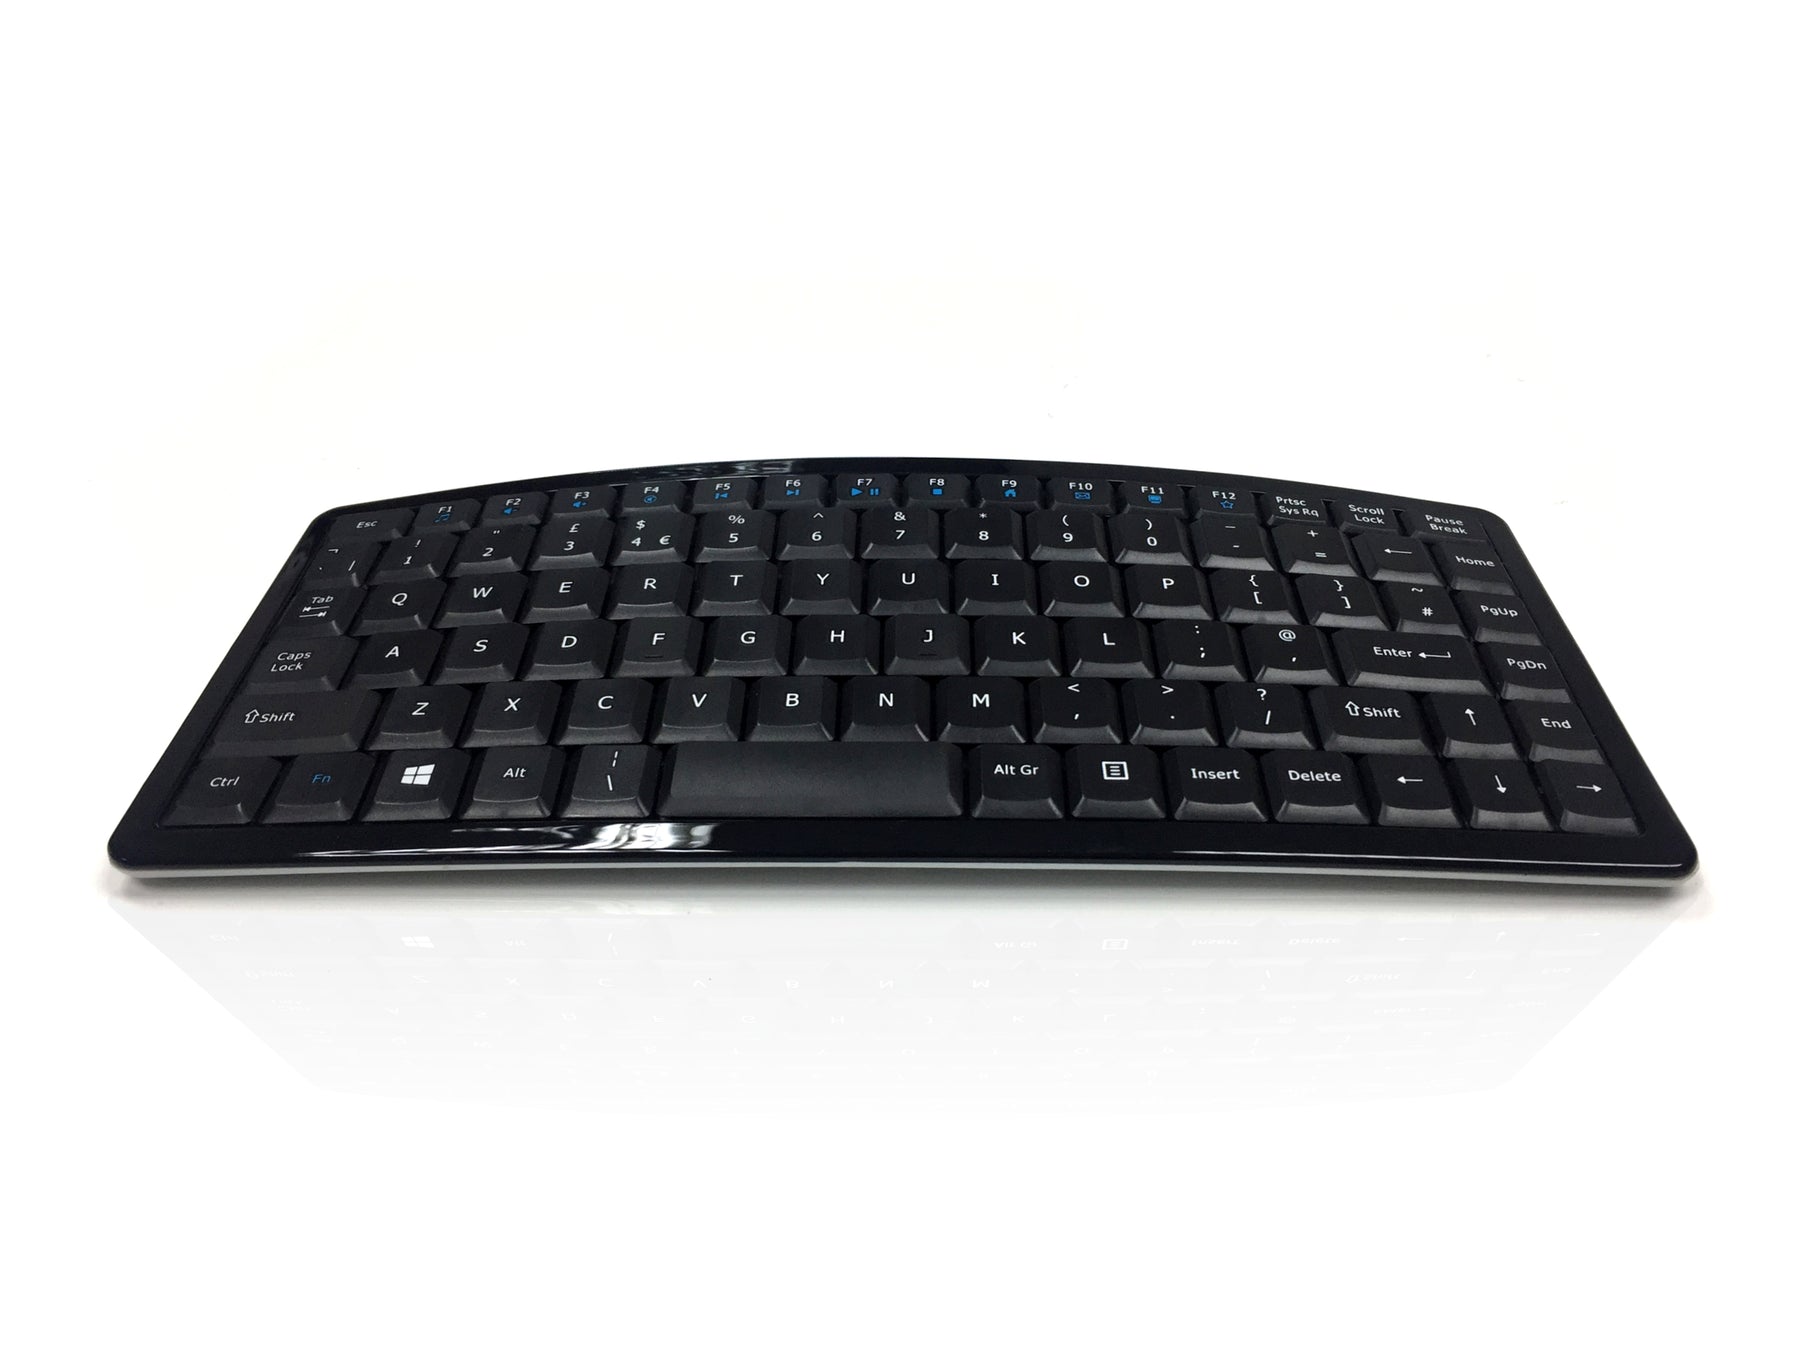 NEW PRODUCT ALERT – Accuratus Curve Keyboard